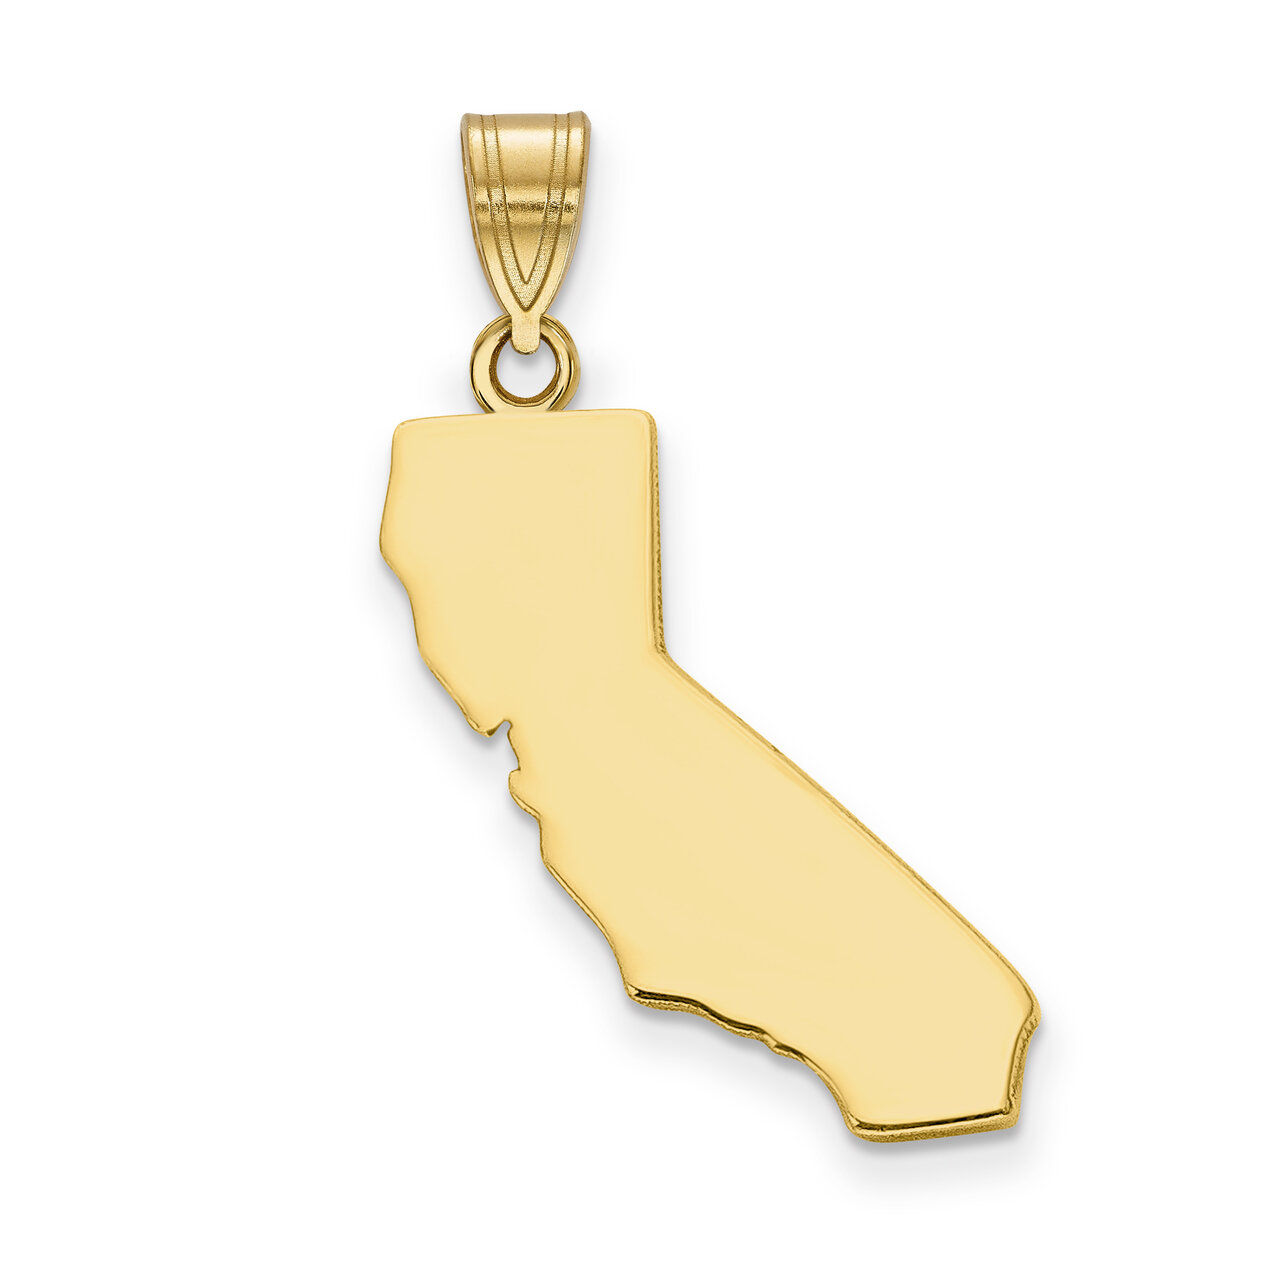 California State Pendant Charm 14k Yellow Gold Engravable XNA707Y-CA